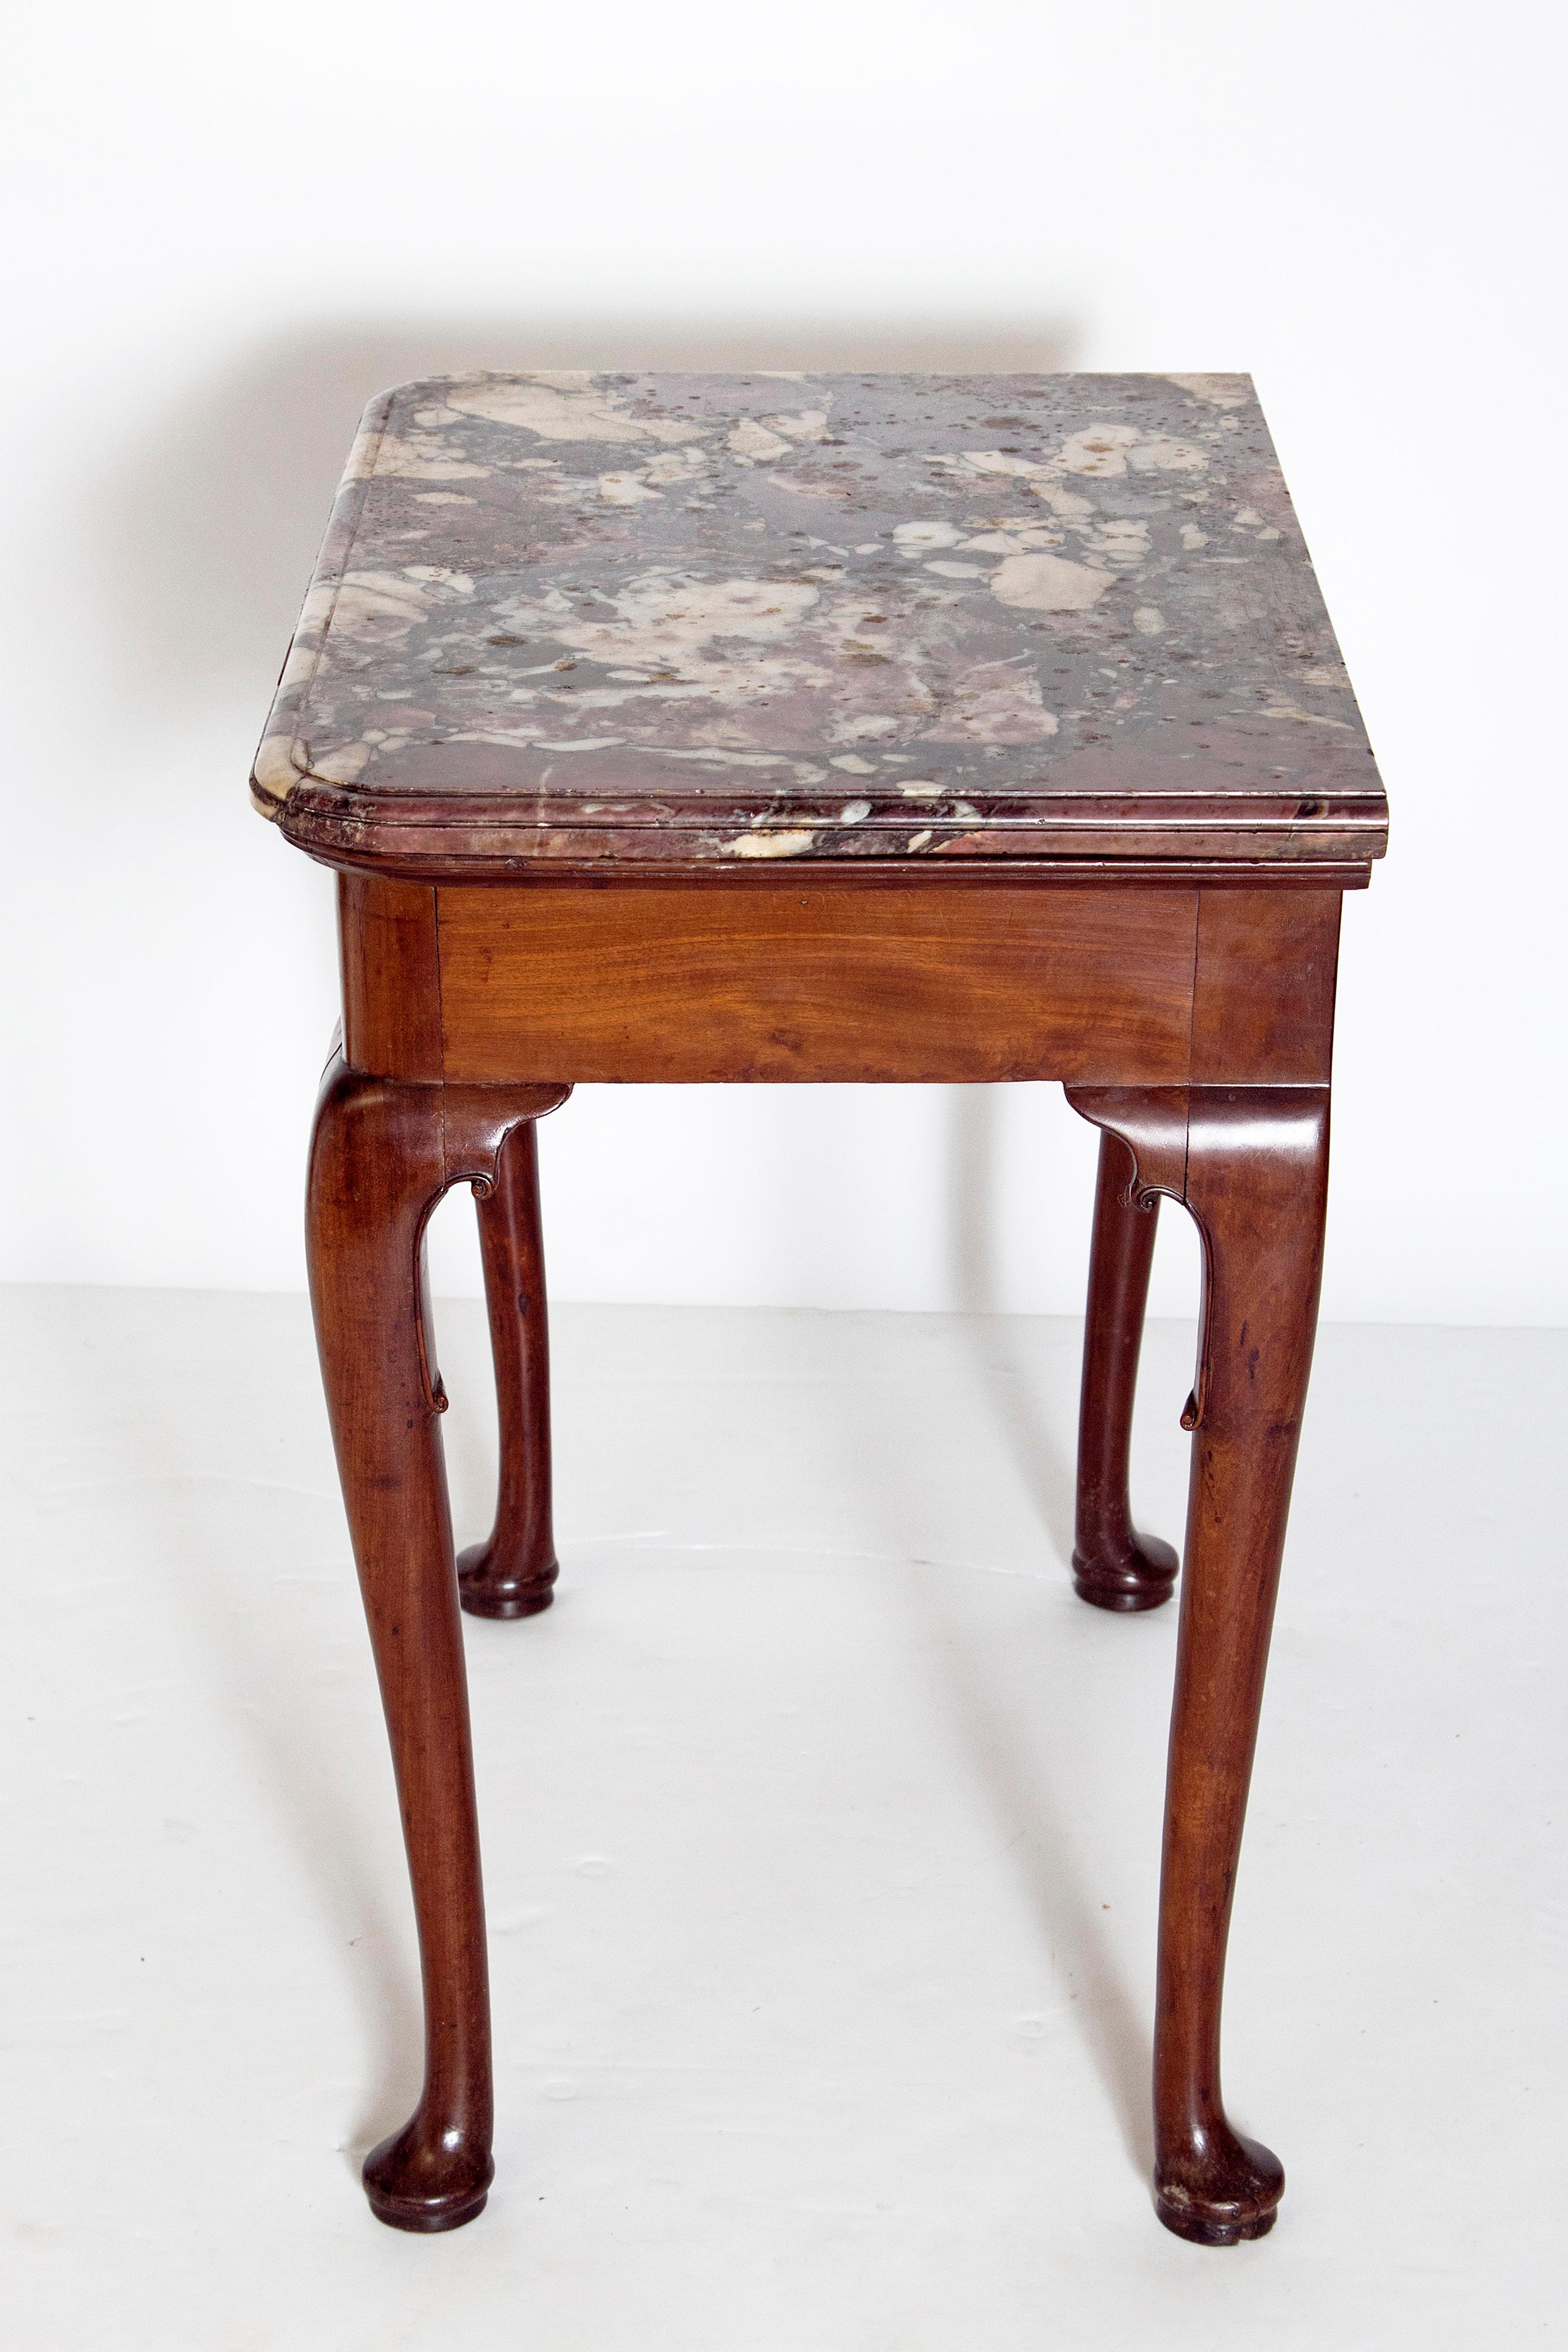 Early 18th Century Queen Anne Mahogany Side Table 1